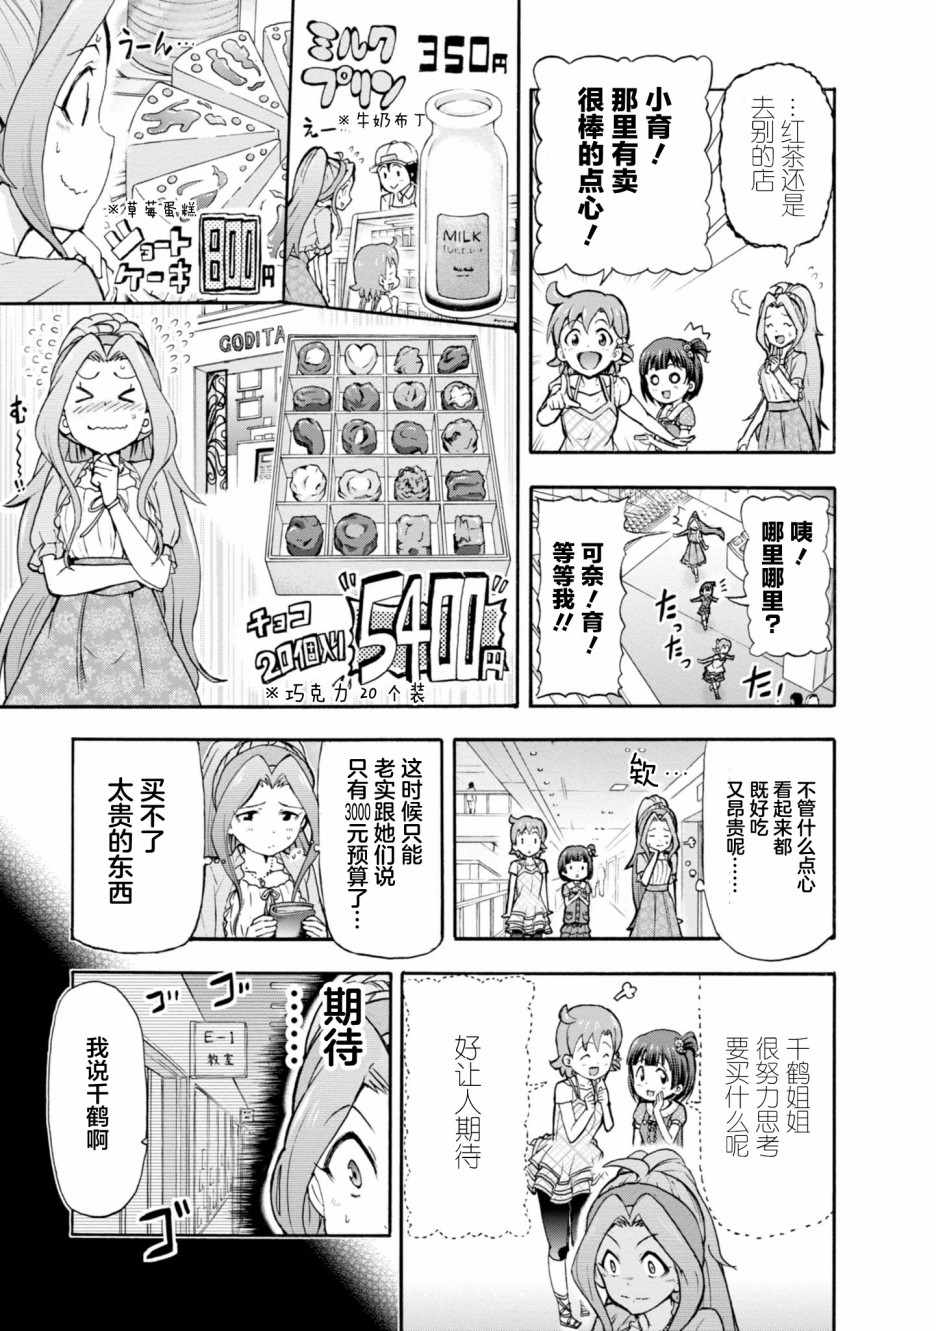 《THE IDOLM@STER MILLION LIVE! Blooming Clover》漫画 Blooming Clover 01卷附赠